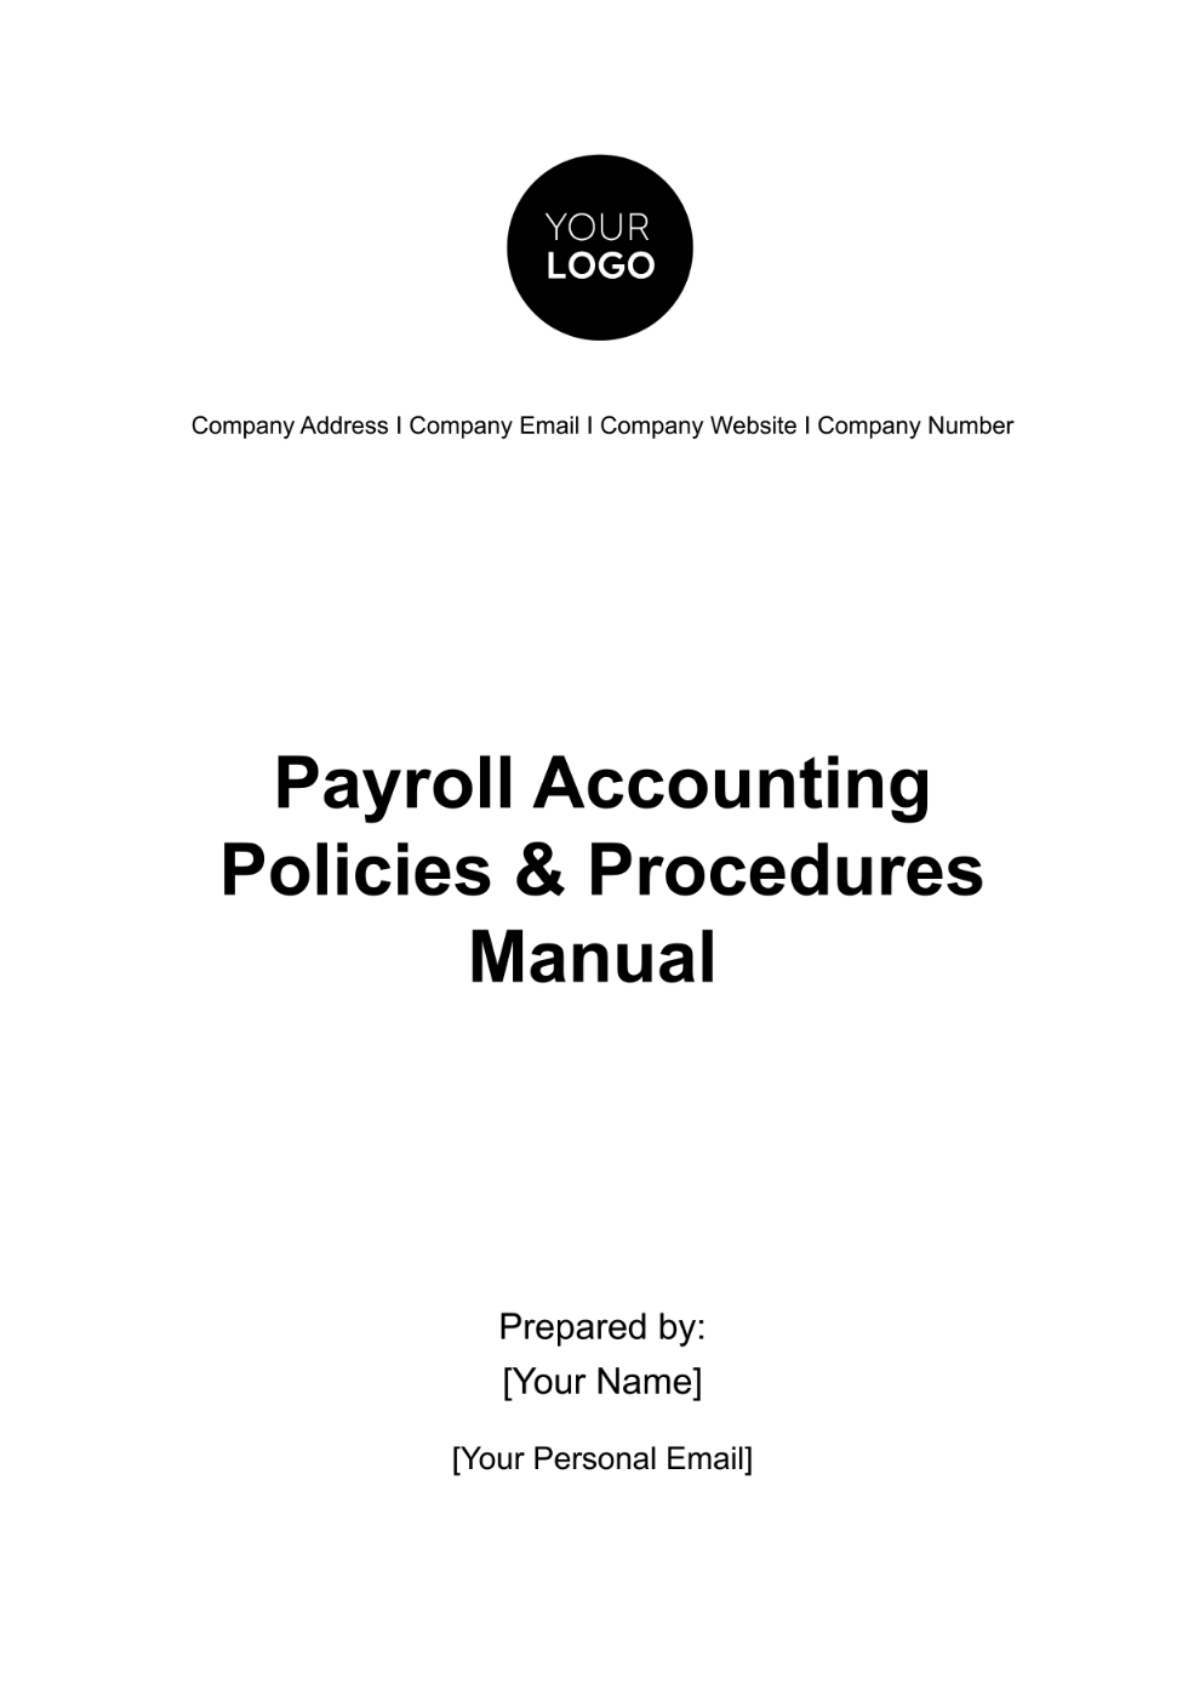 Free Payroll Accounting Policies & Procedures Manual Template